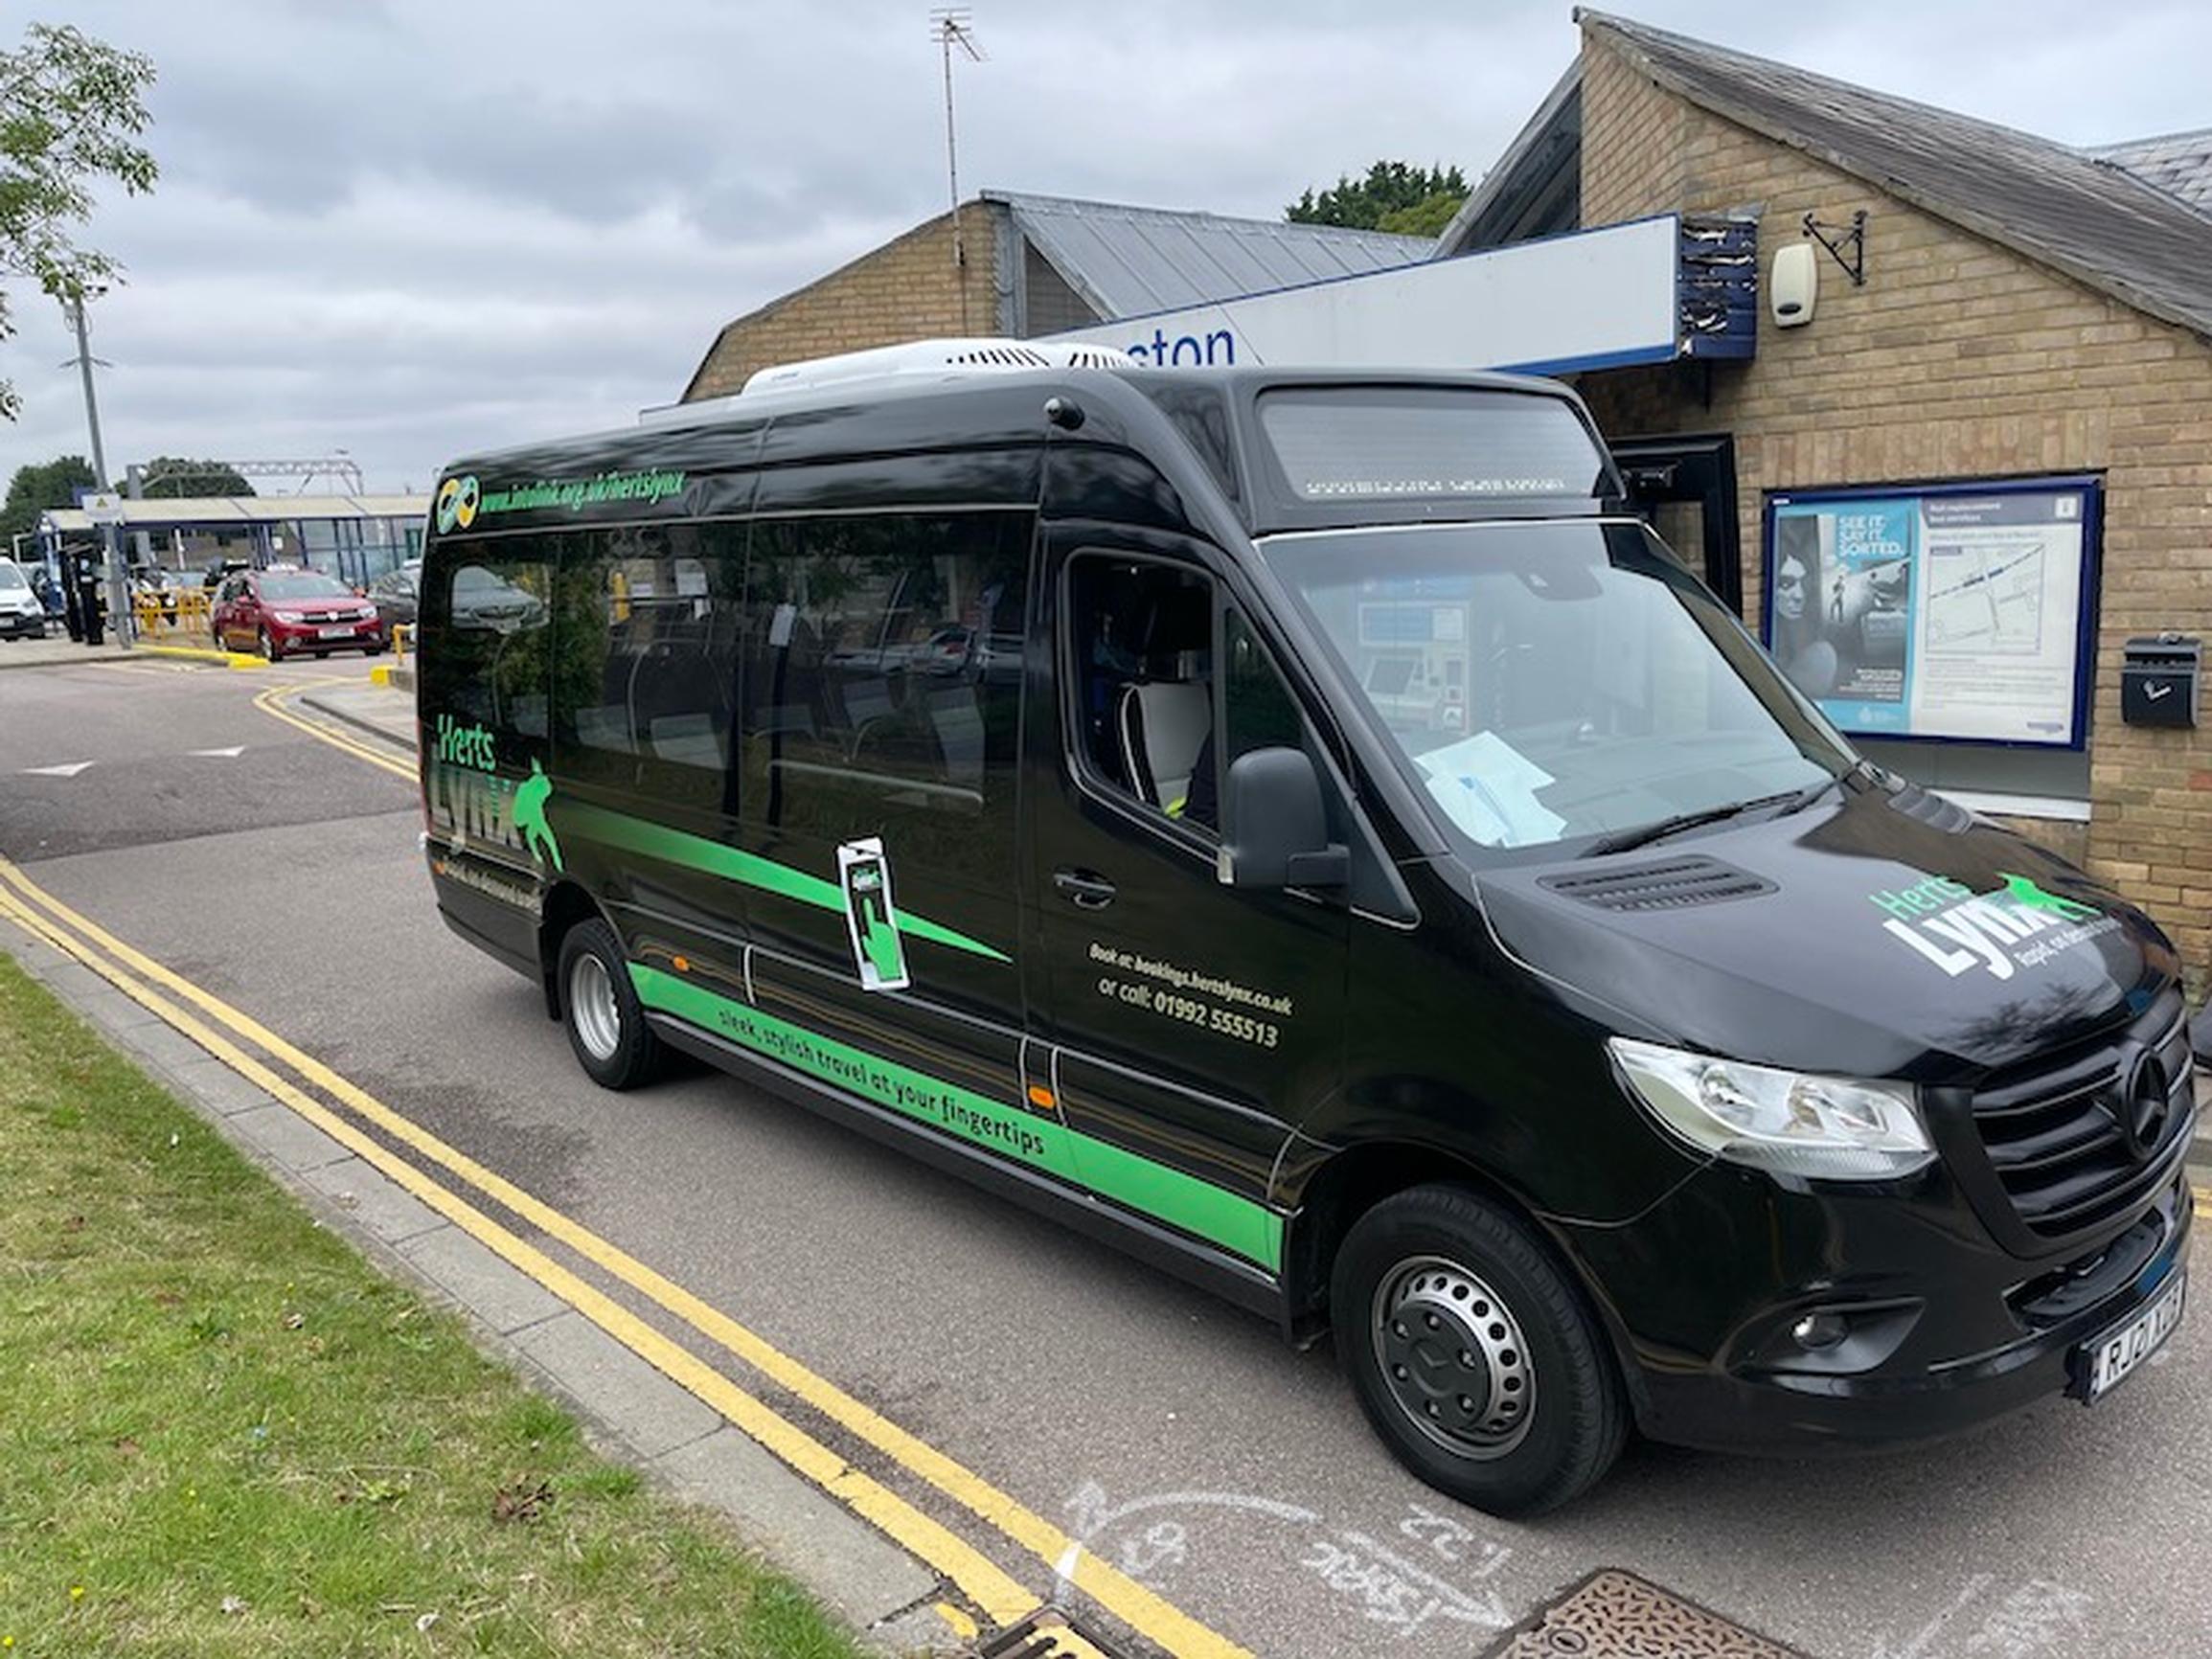 Padam Mobility in the UK powers HertsLynx, an on-demand bus service